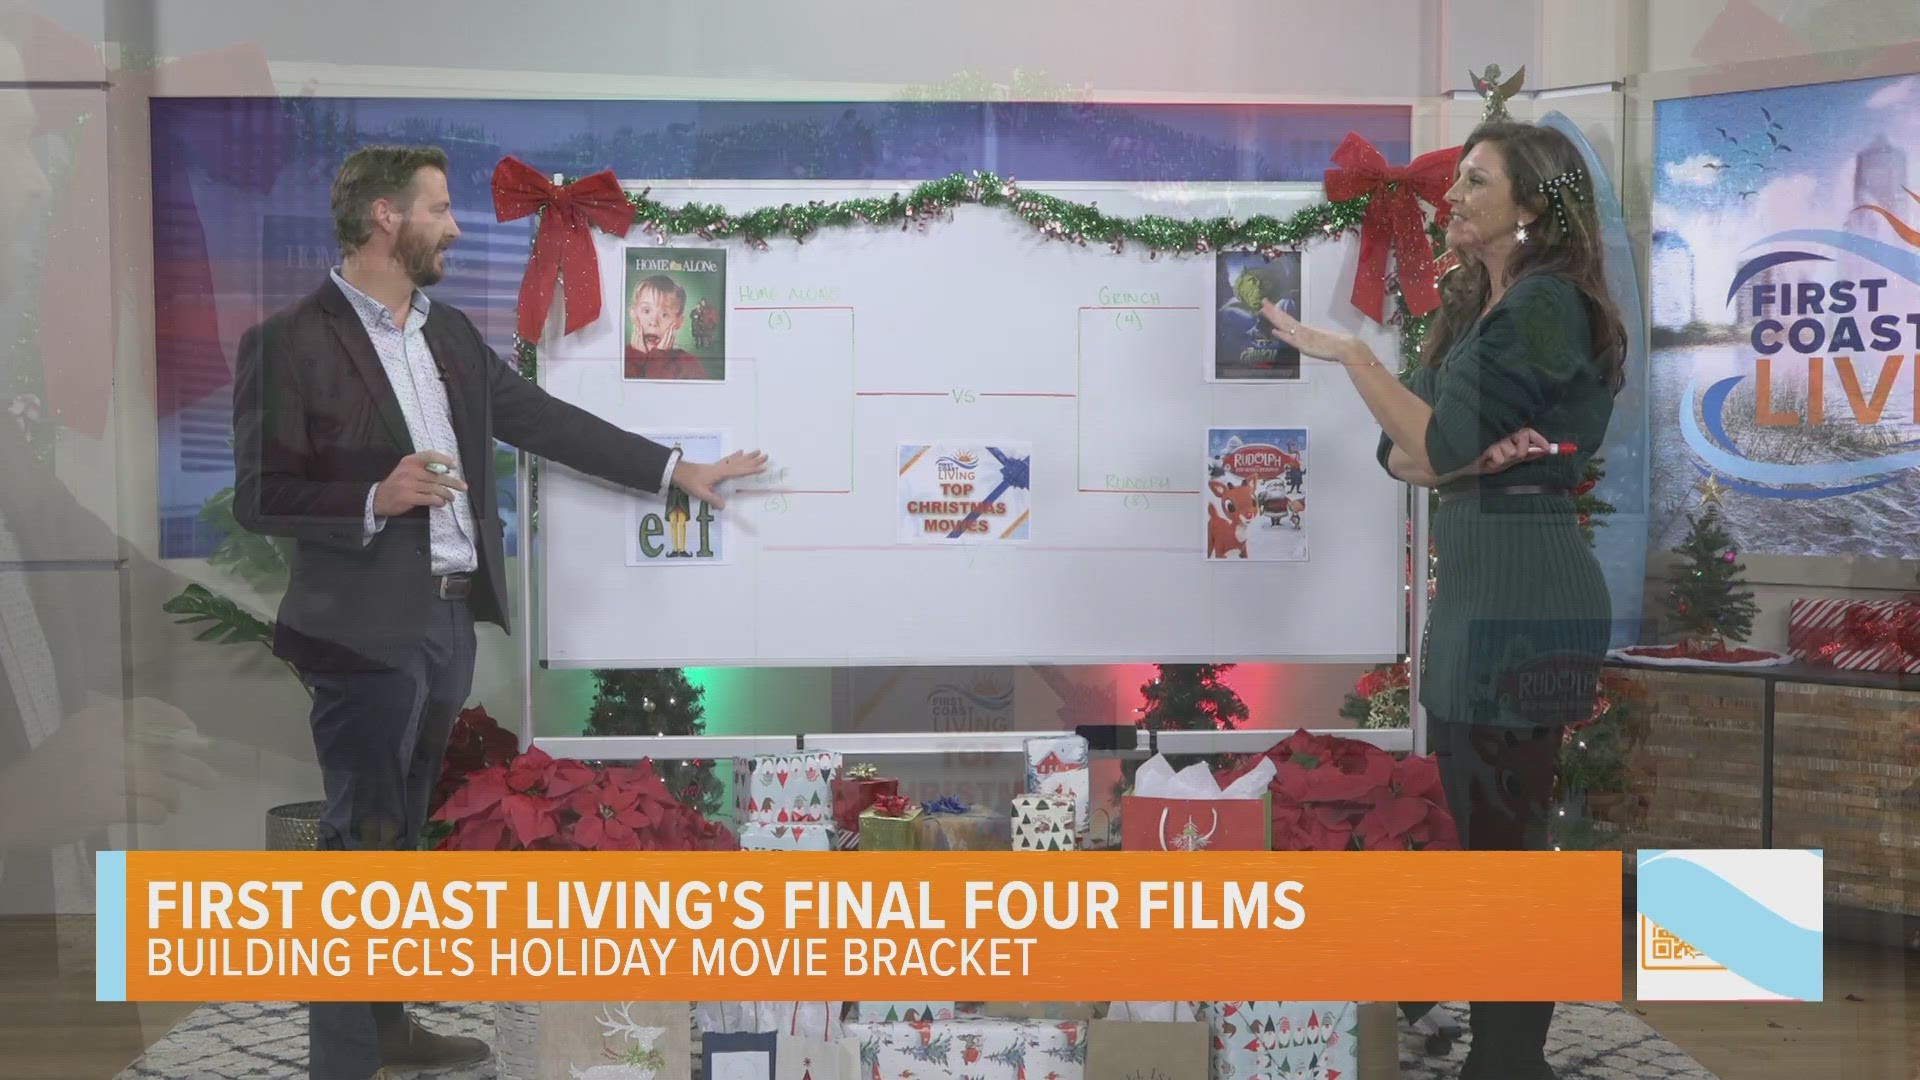 Rudolph the Red-Nosed Reindeer is the best Christmas movie according to FCN voting